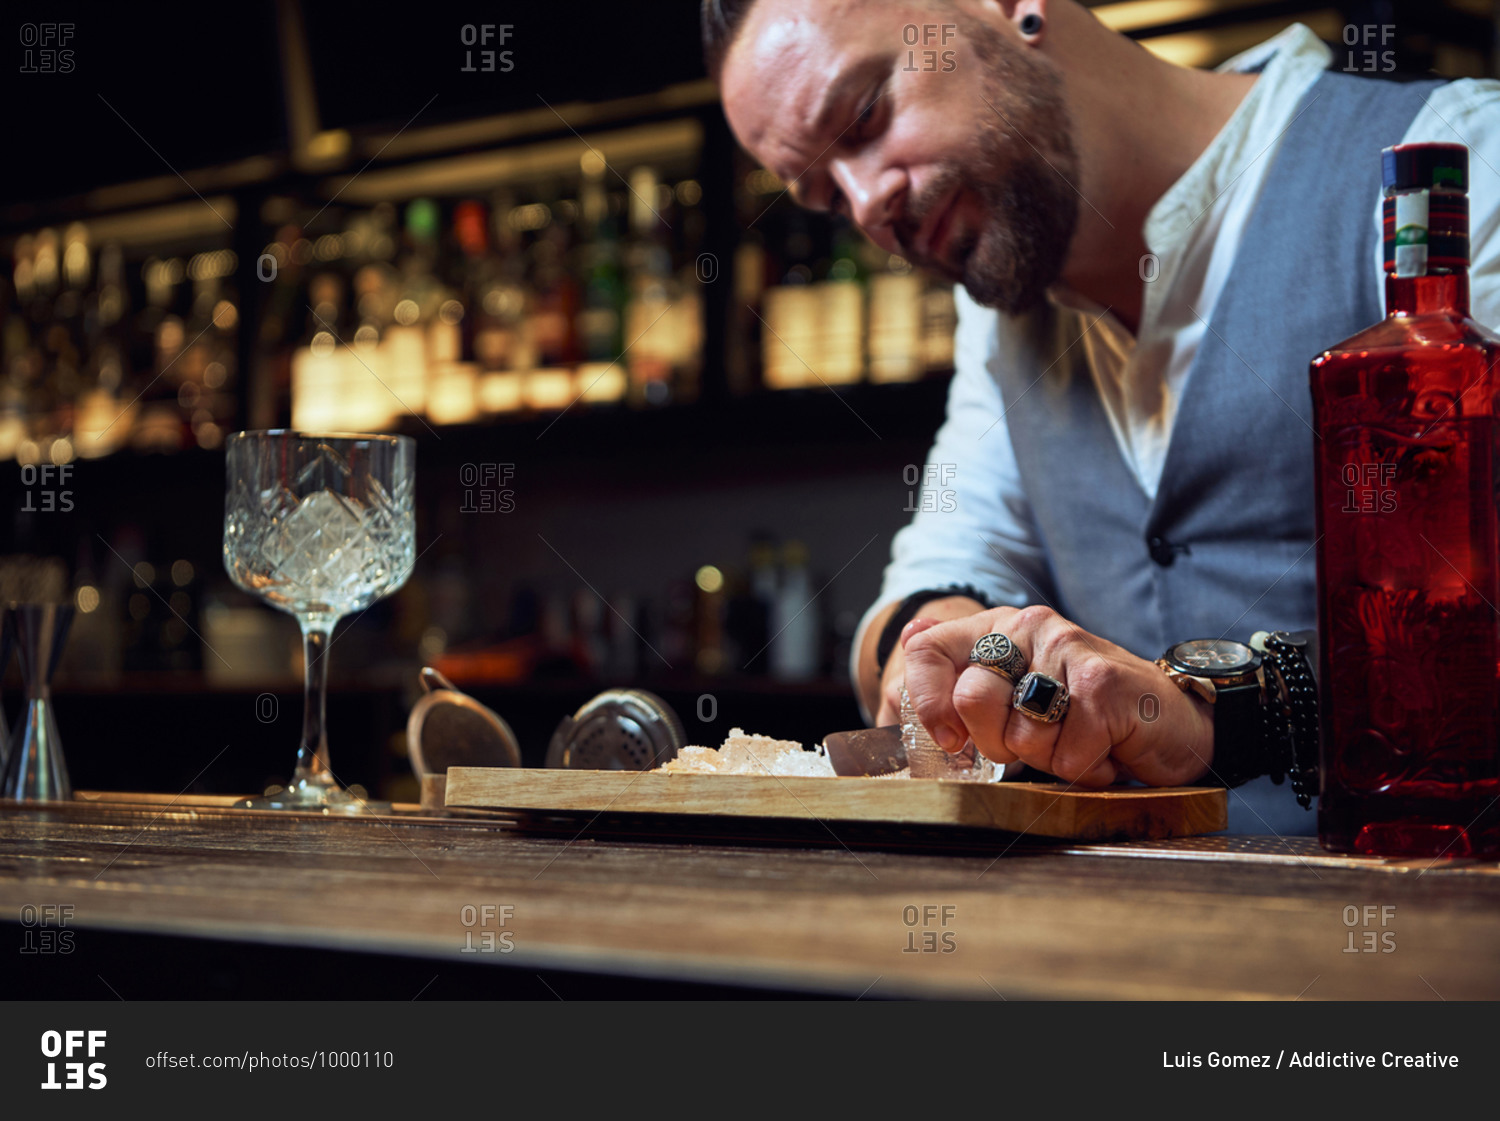 Professional bartender cutting ice cube with knife on wooden board while preparing a cocktail in the bar